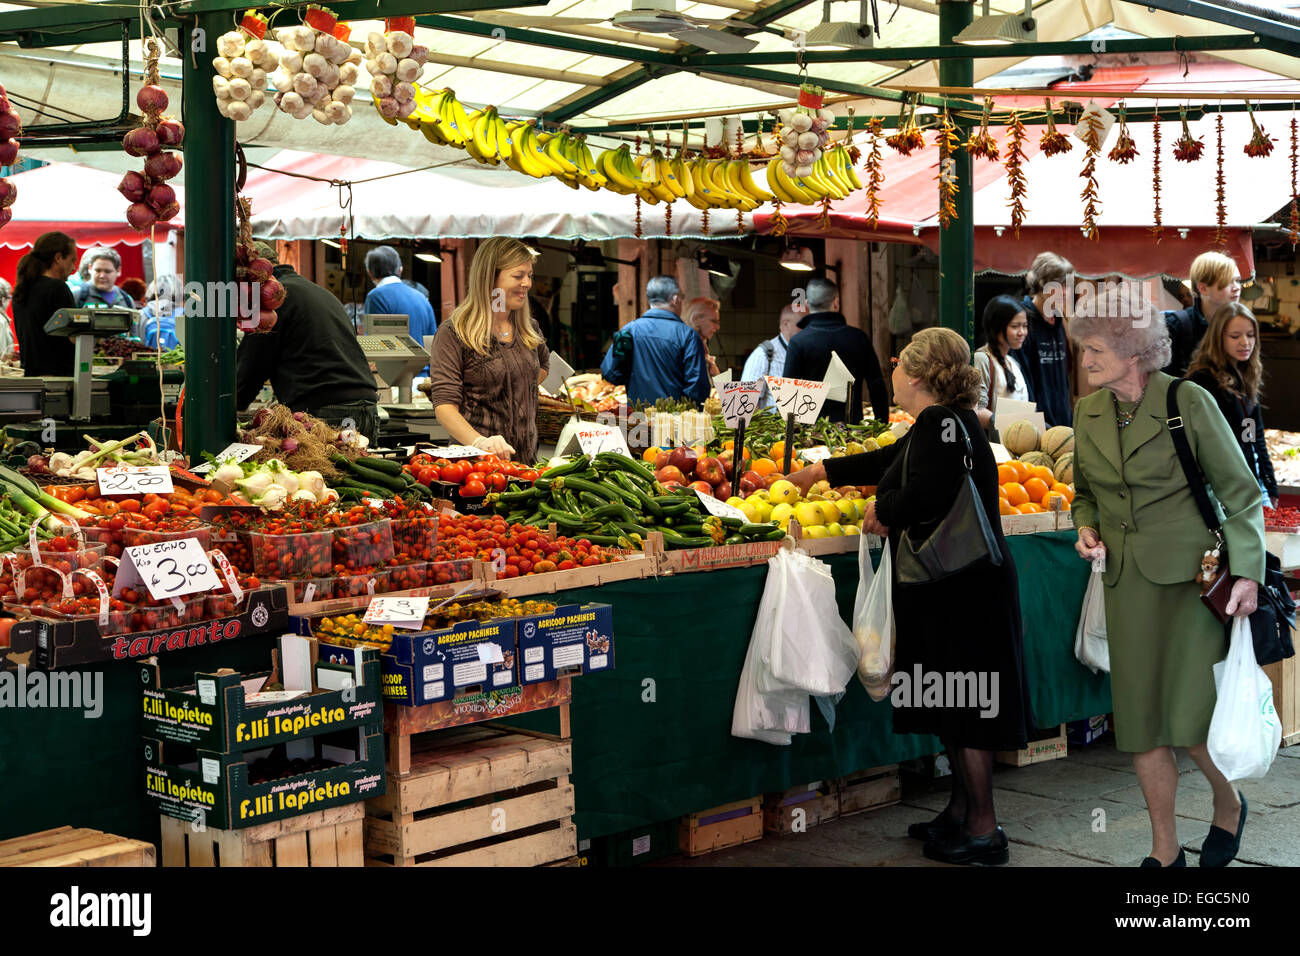 Shoppers at produce stand, farmers market, Venise, Italie Banque D'Images